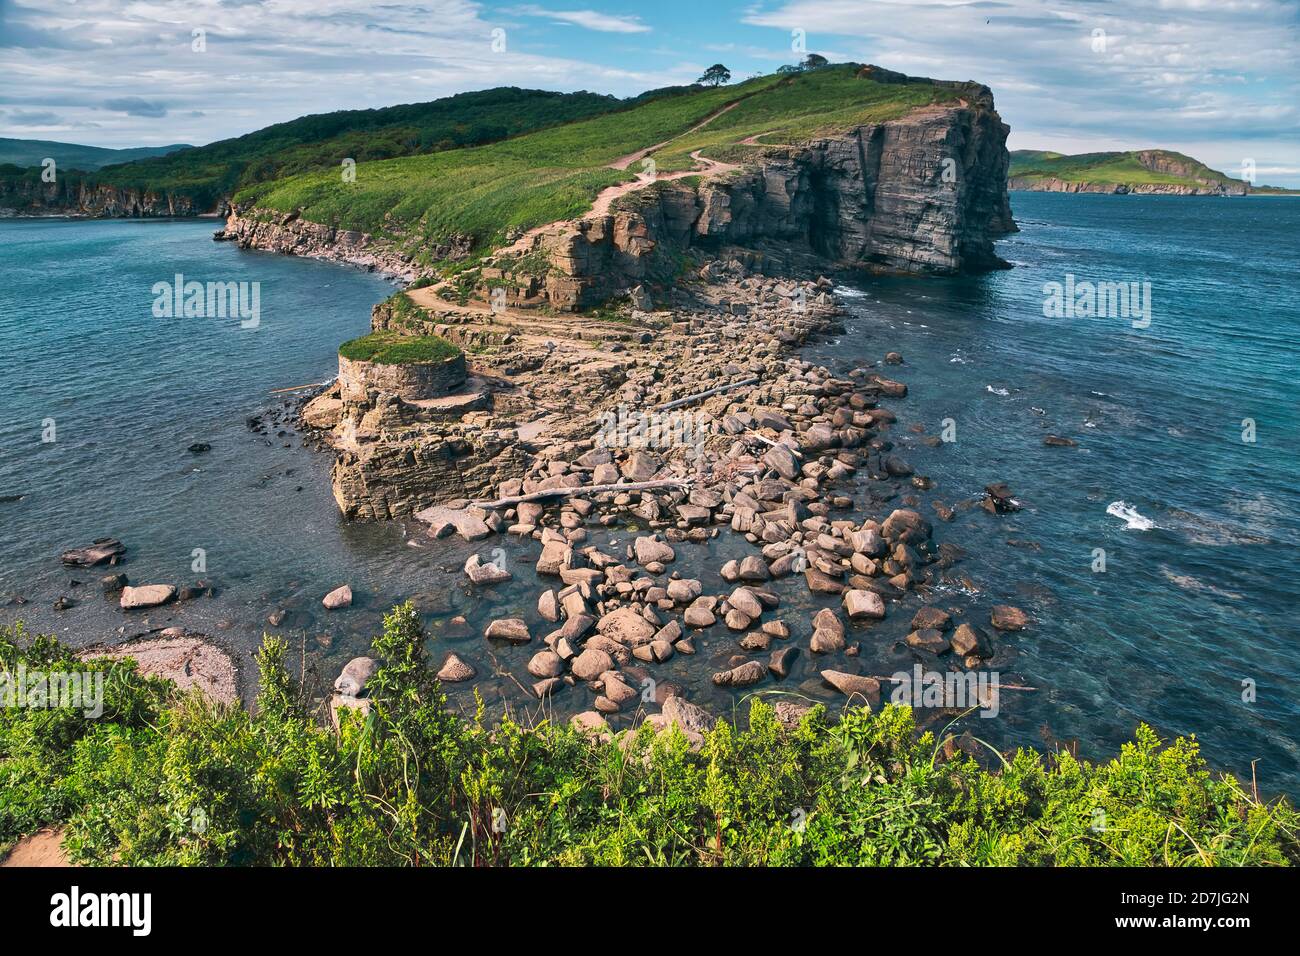 Scenic view of island and water at Vladivostok, Russia Stock Photo